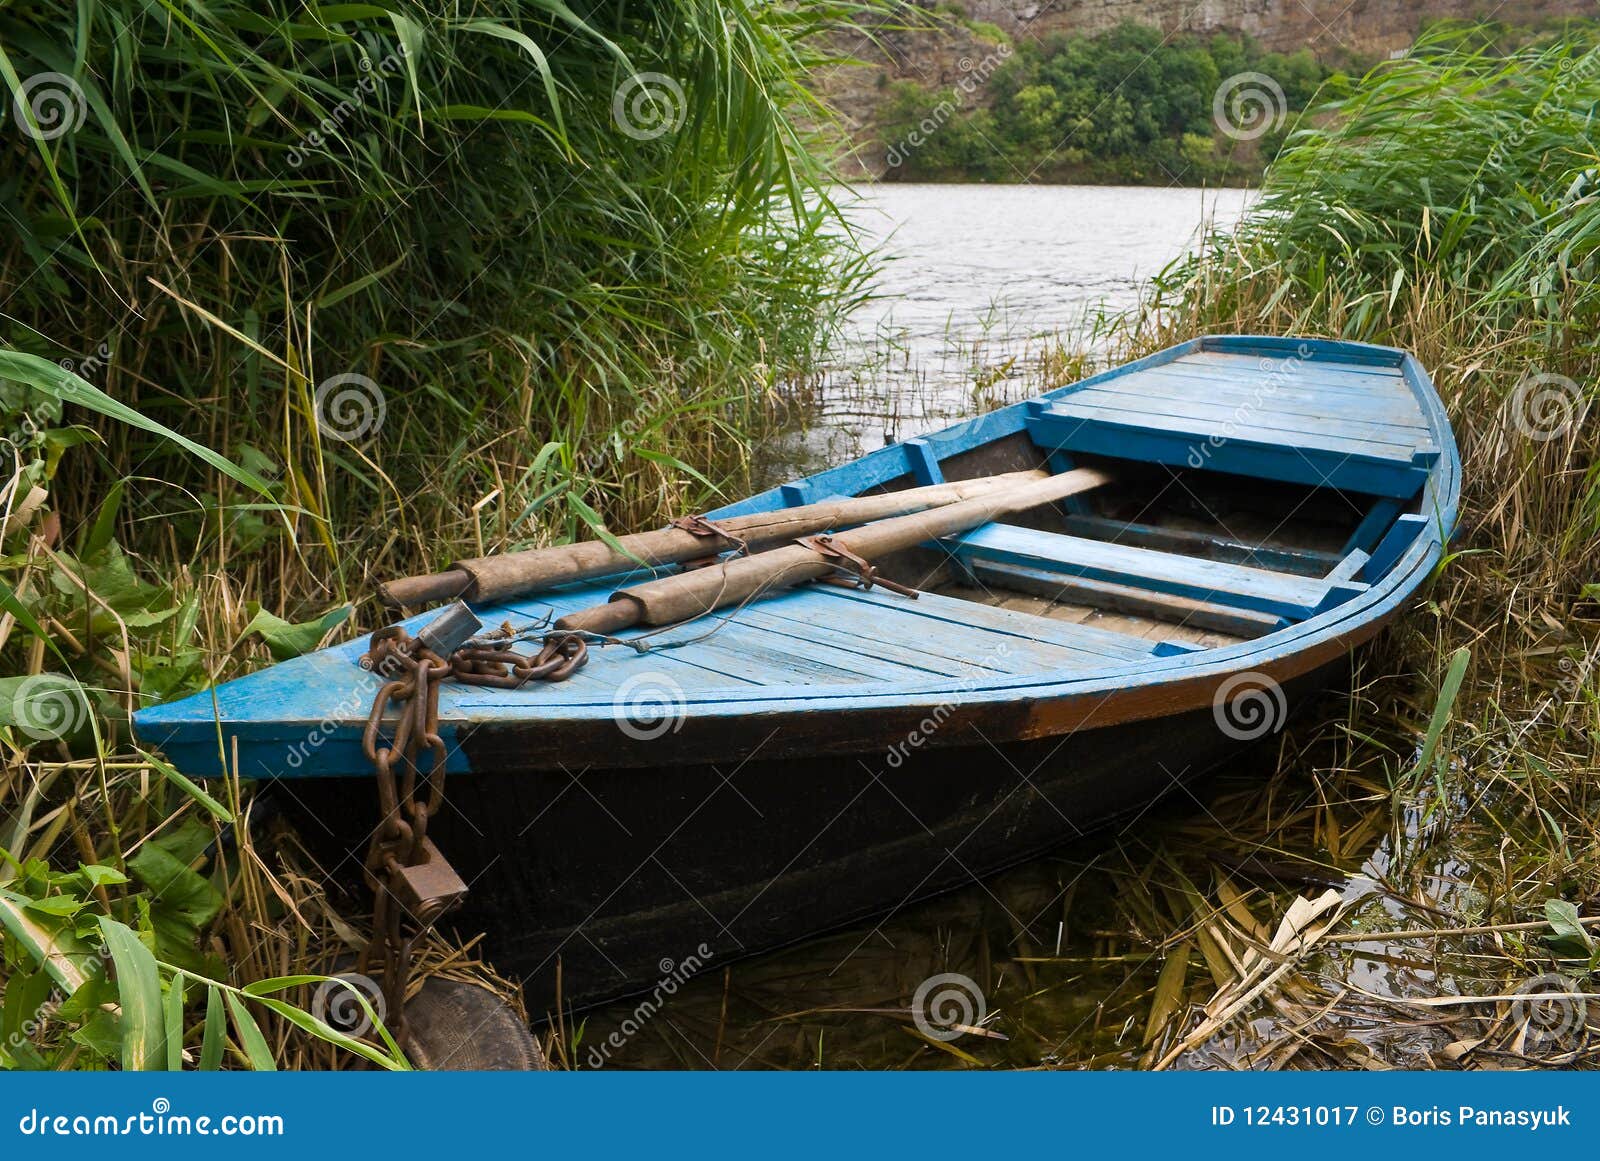 Old Wooden Fishing Boat Royalty Free Stock Photography - Image 